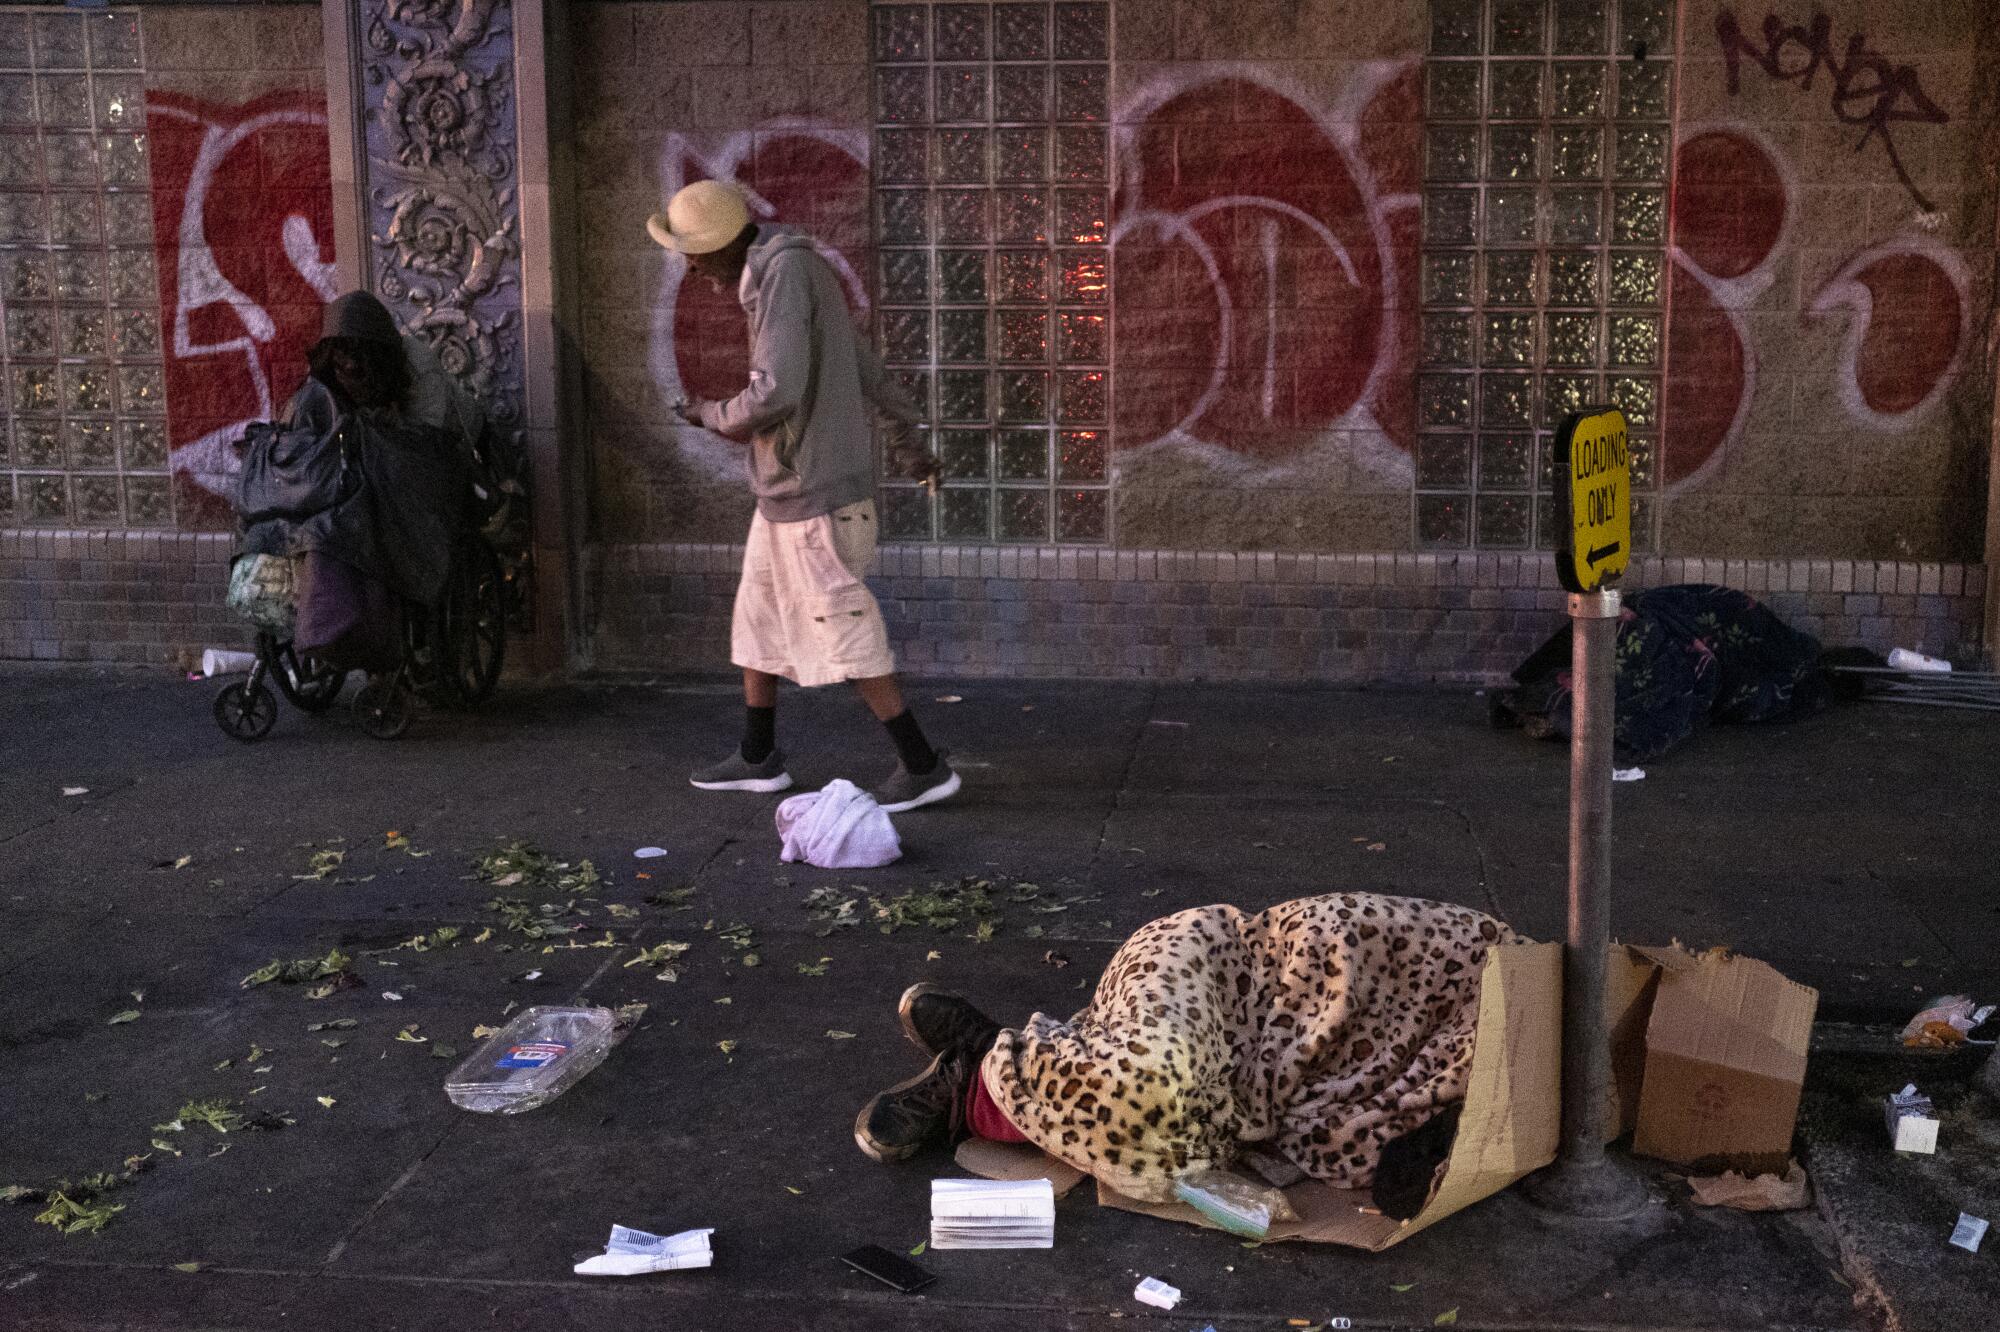 As the sun starts to rise at dawn, people start to wake up and move around on skid row in Los Angeles.